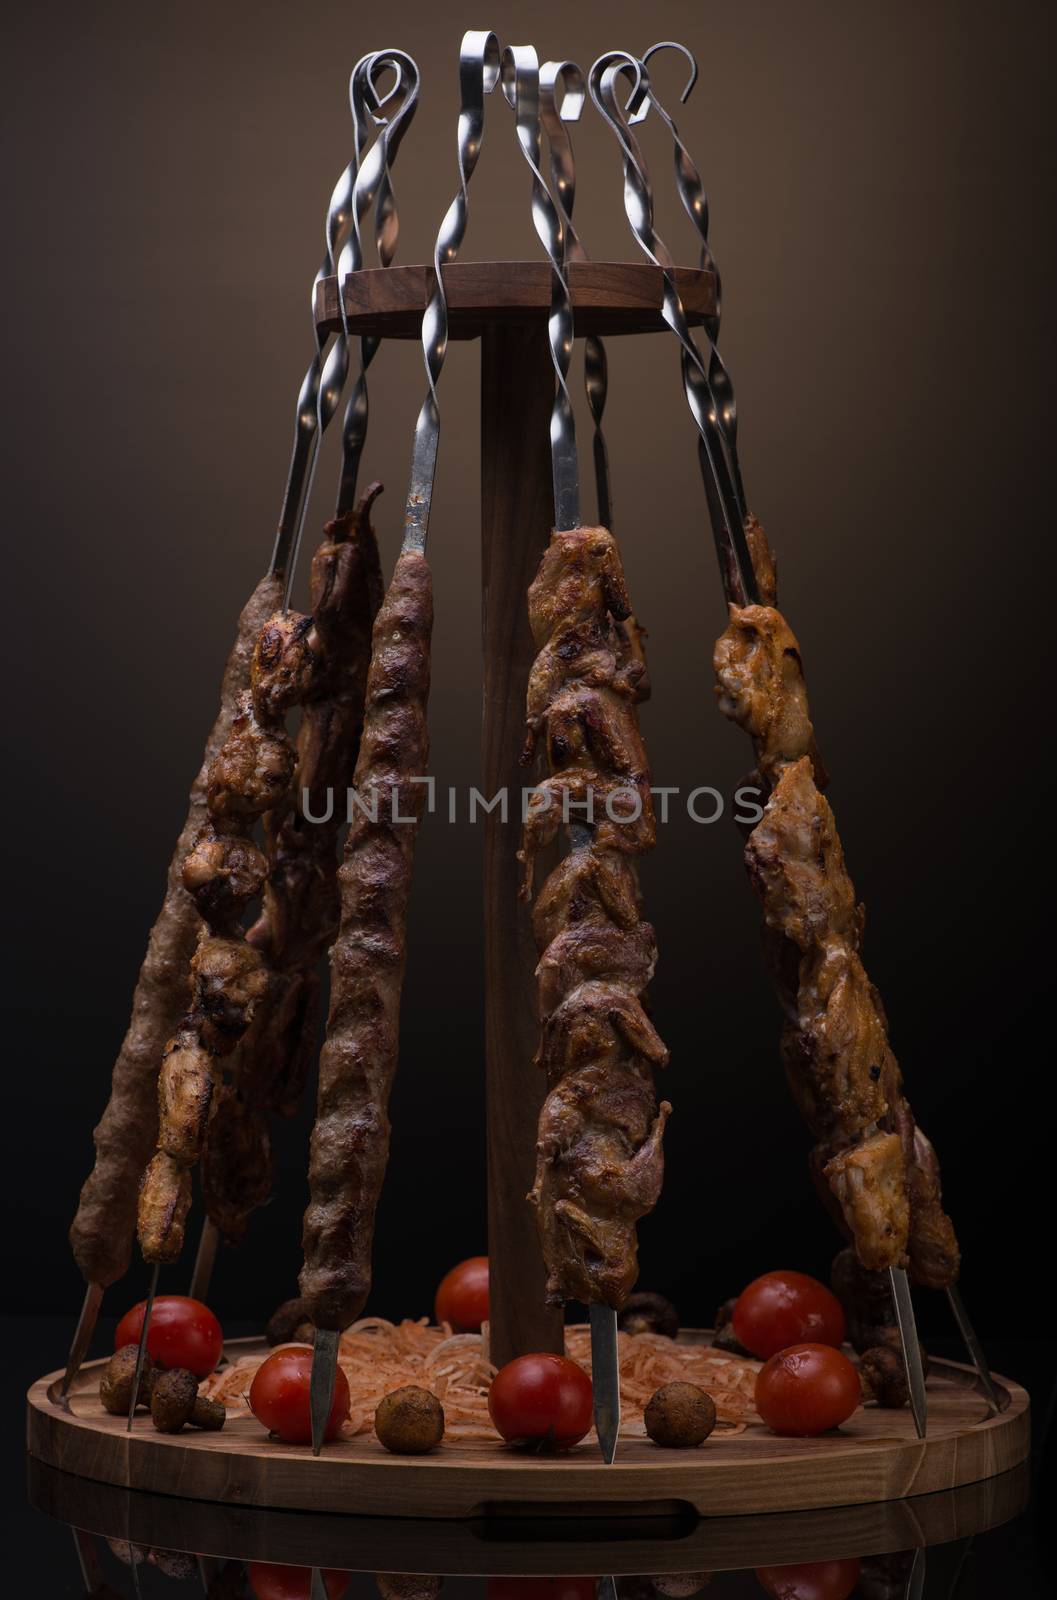 kebab on skewers in a vertical position on a dark background